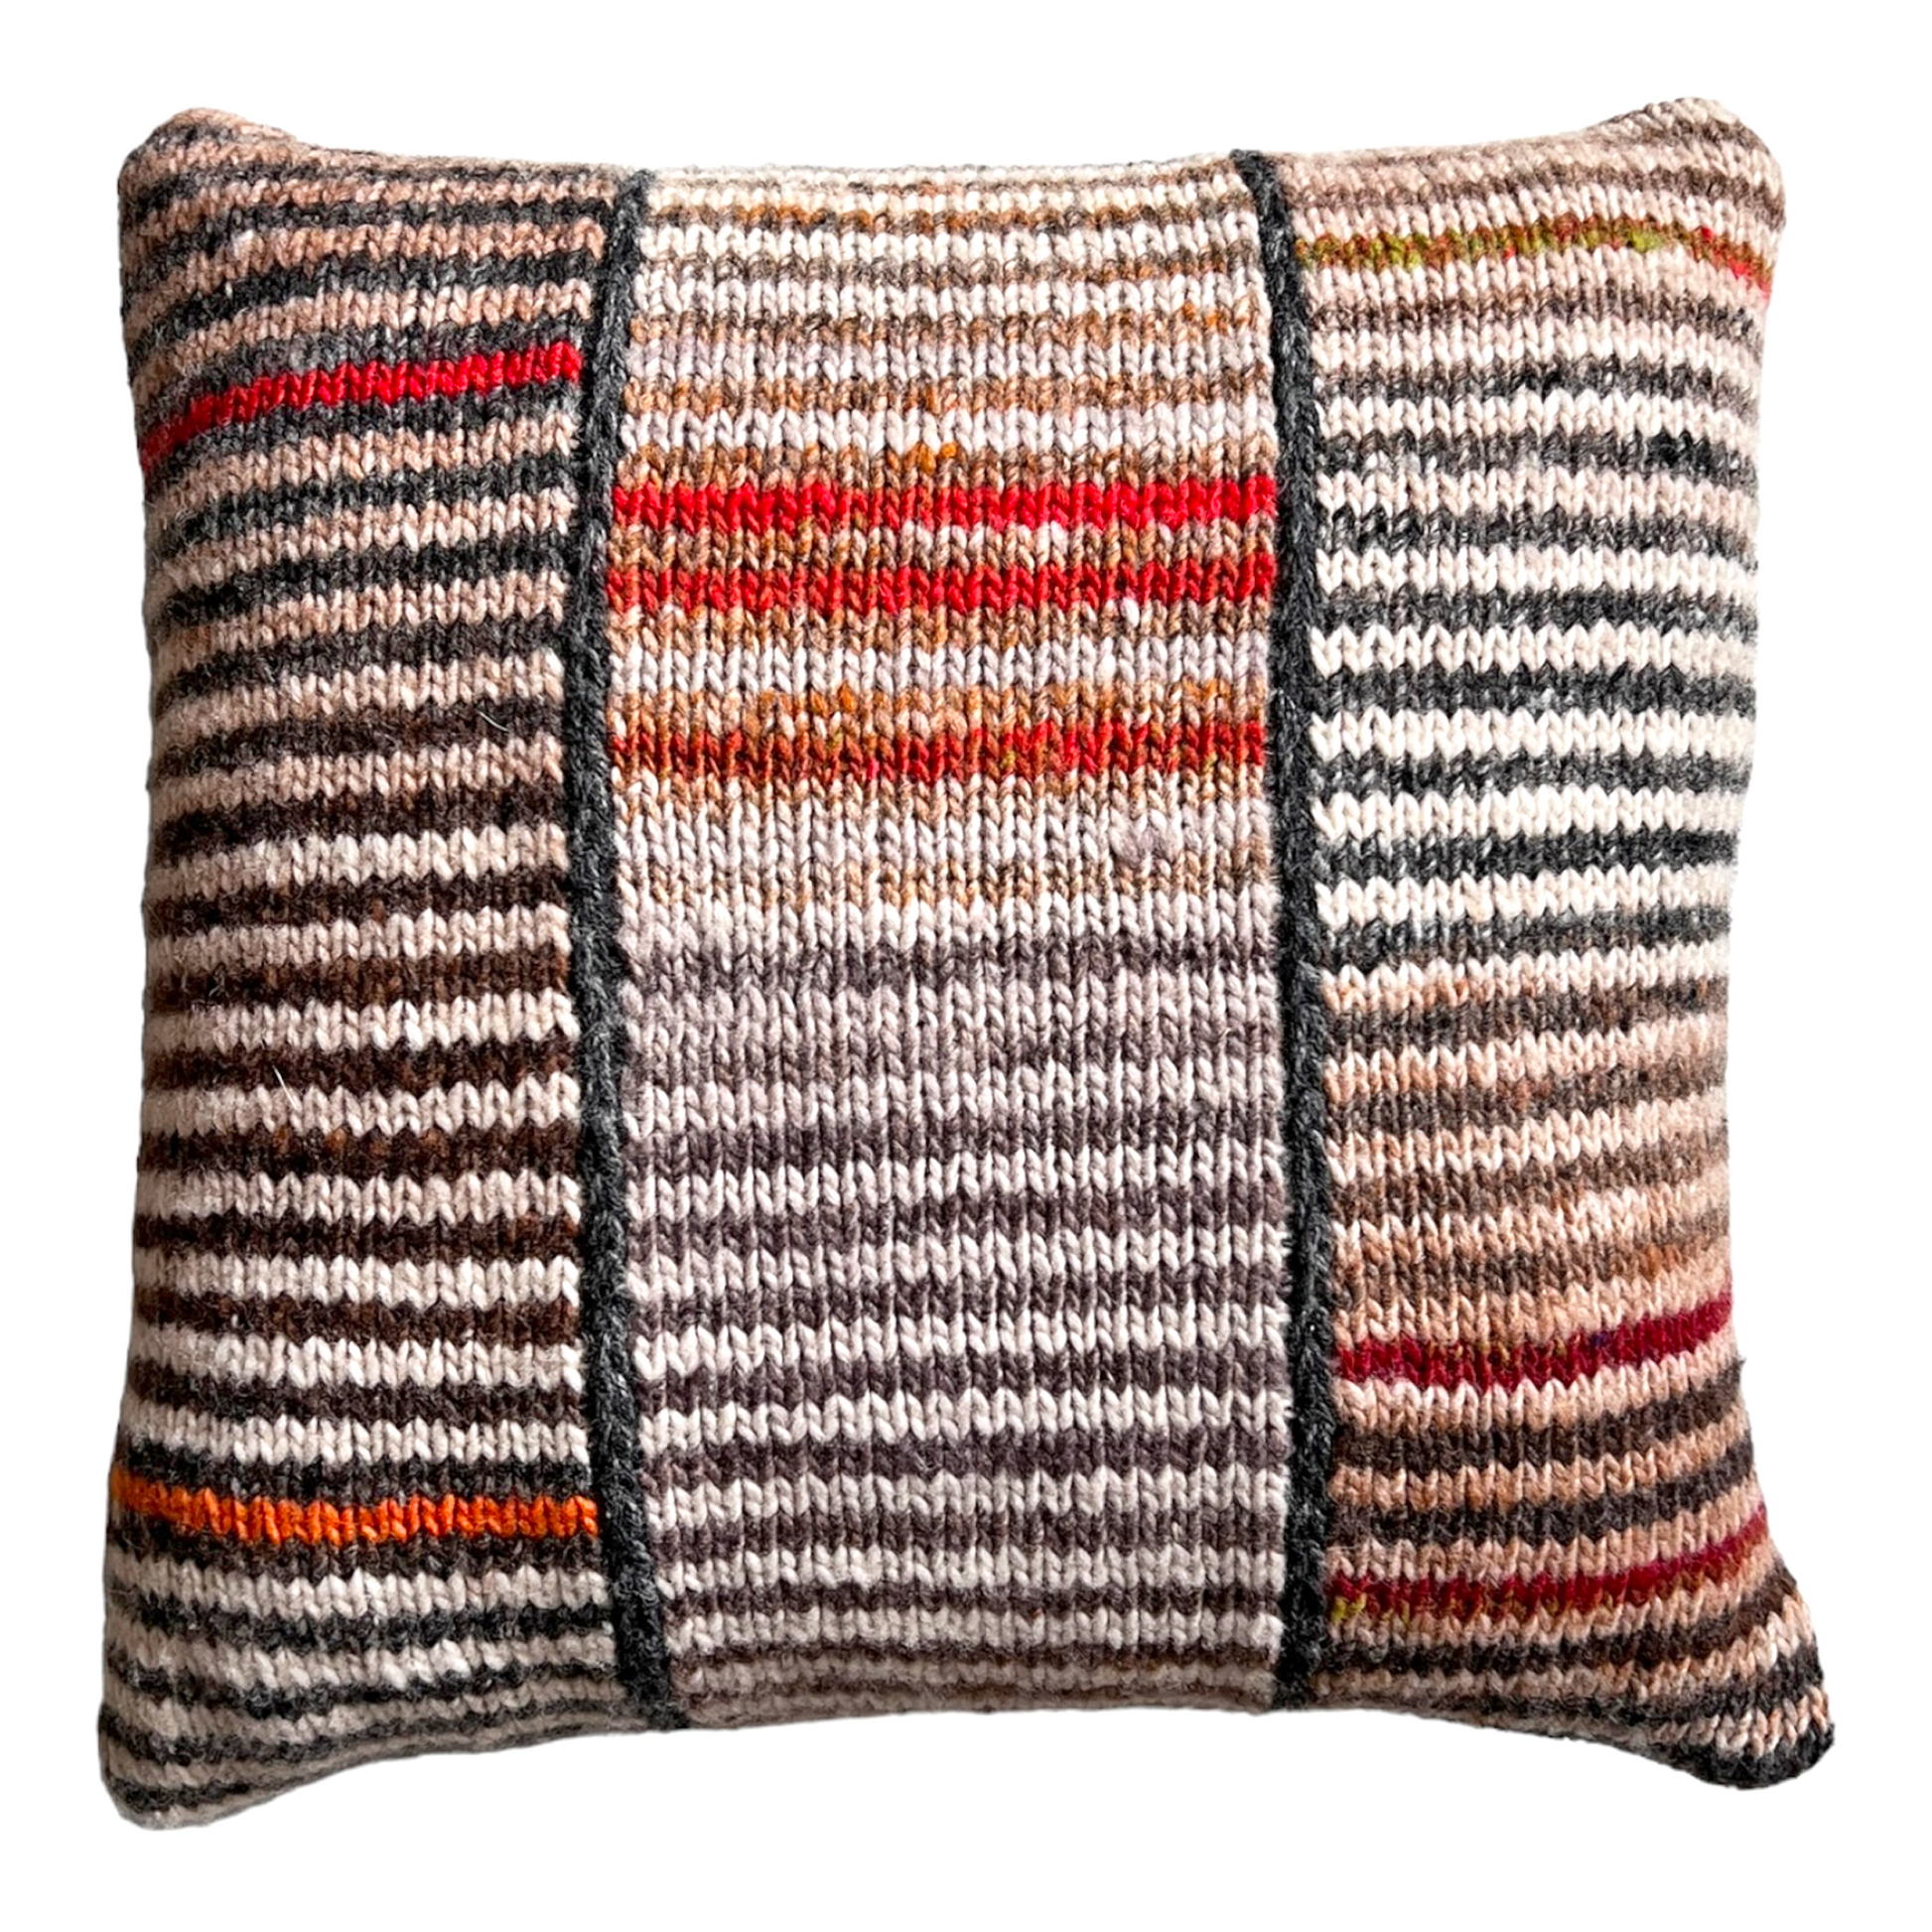 100% wool throw pillow, hand-knit in three vertical sections of alternating, variegated stripes in rich earth tones plus a pop of orange.